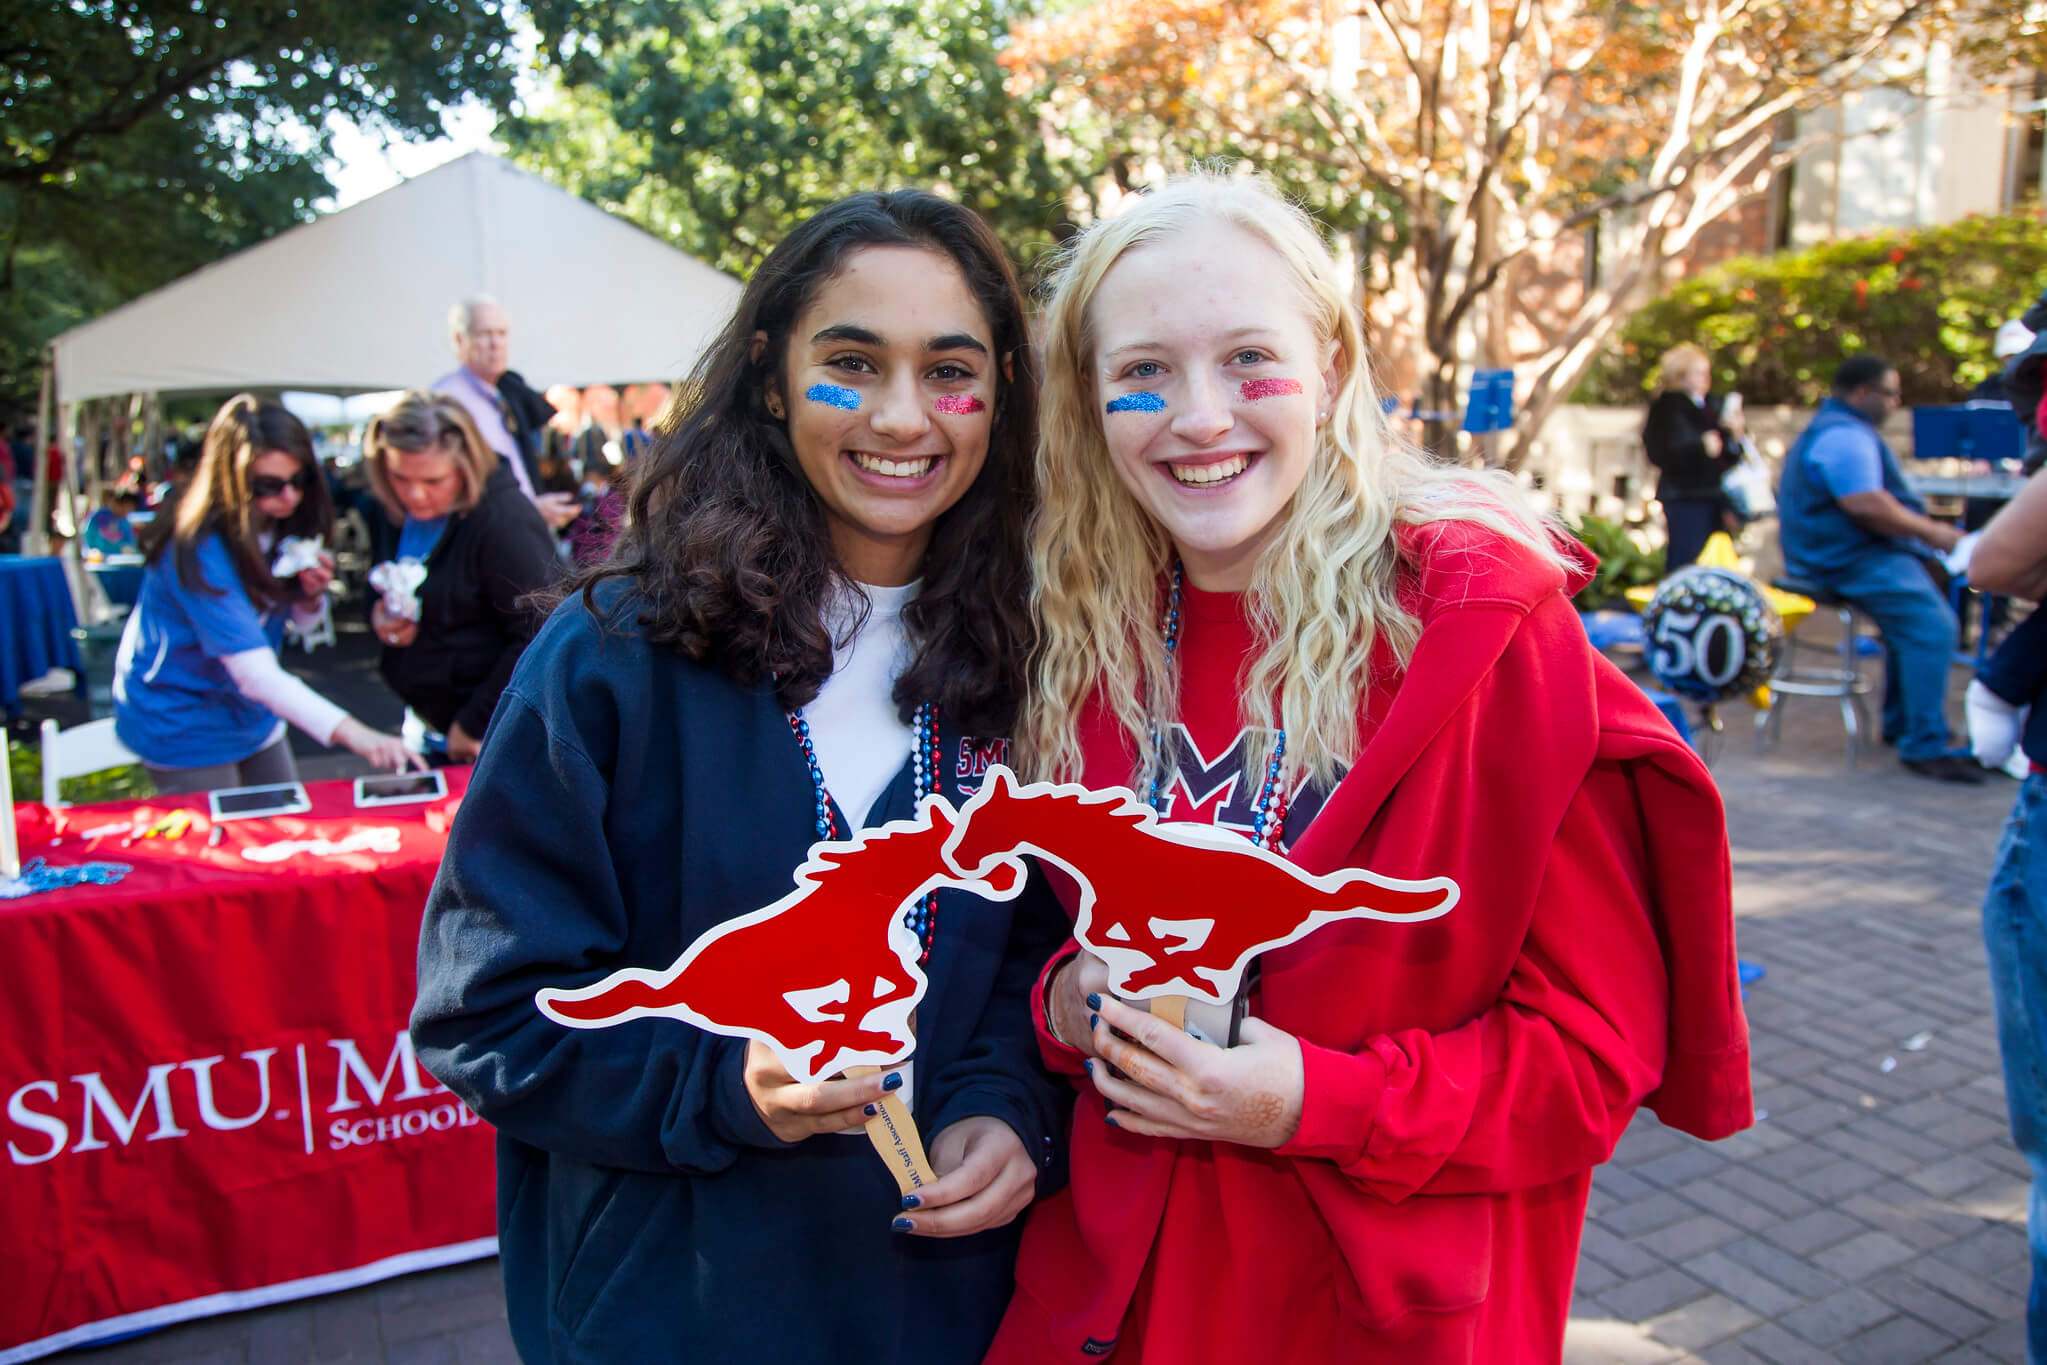 Two Meadows students smile and pose with Mustang signs at an SMU event.